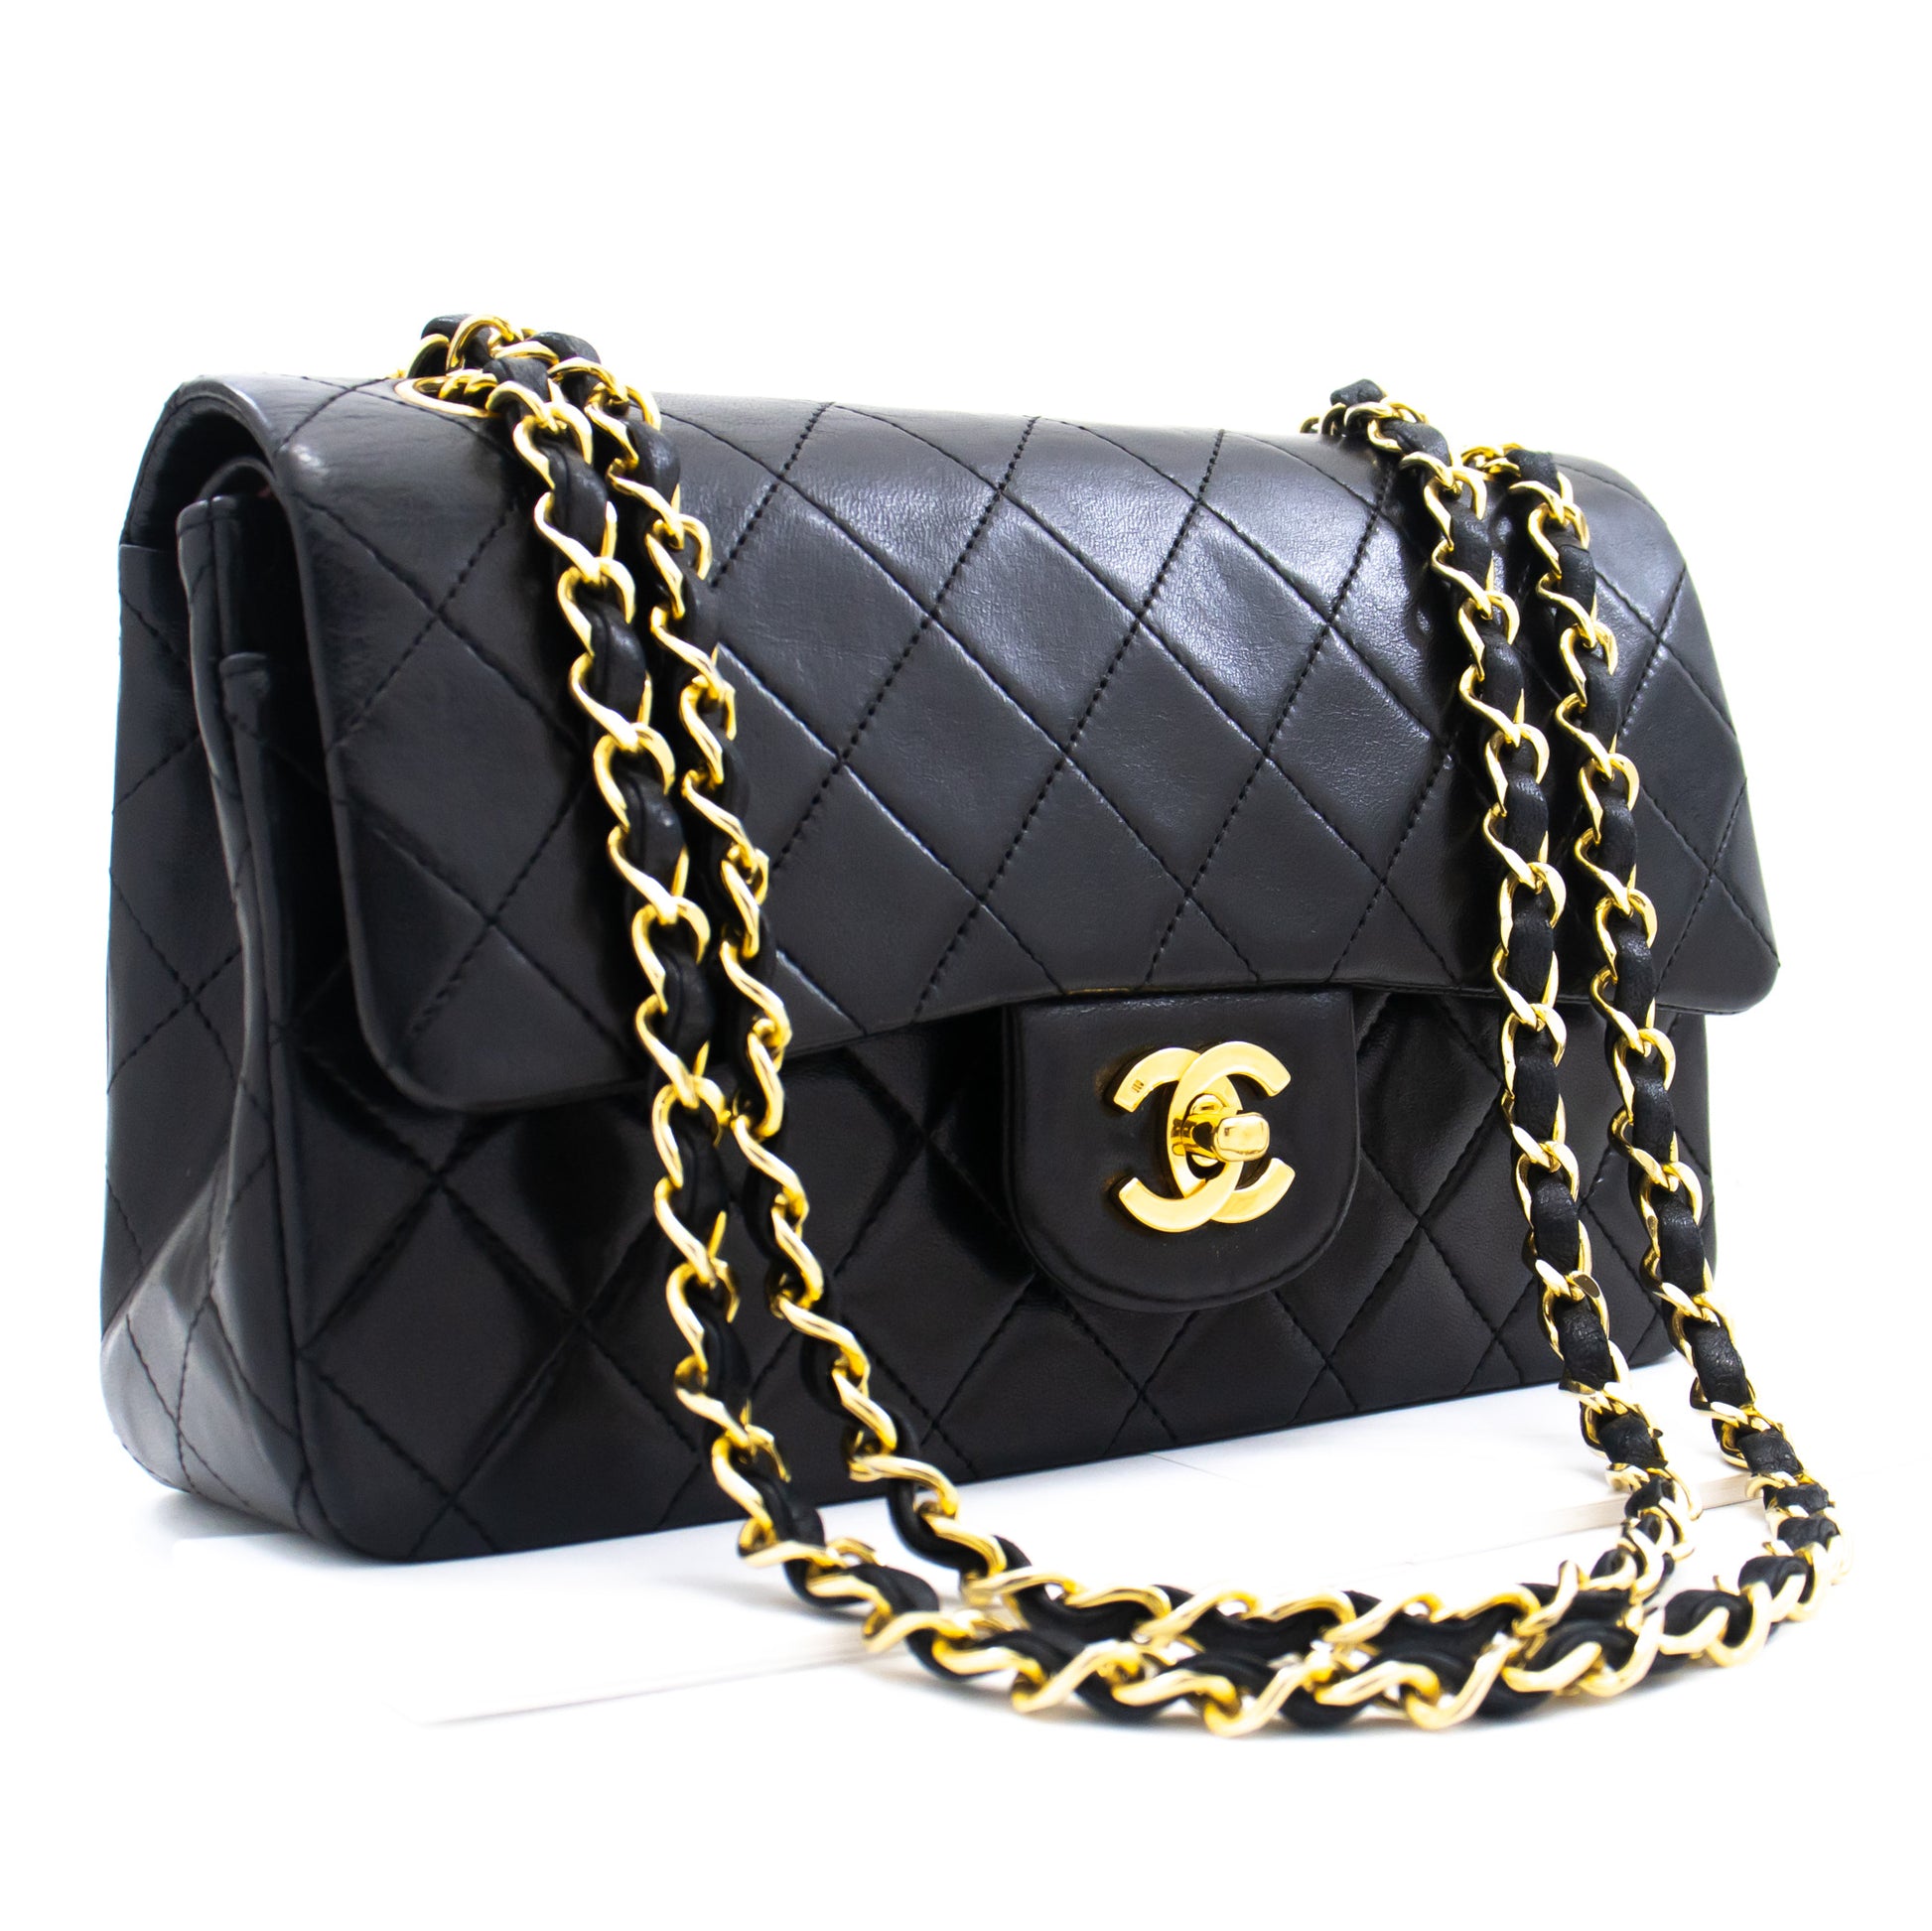 Chanel Beige/Black Quilted Calfskin Leather Gabrielle Clutch with